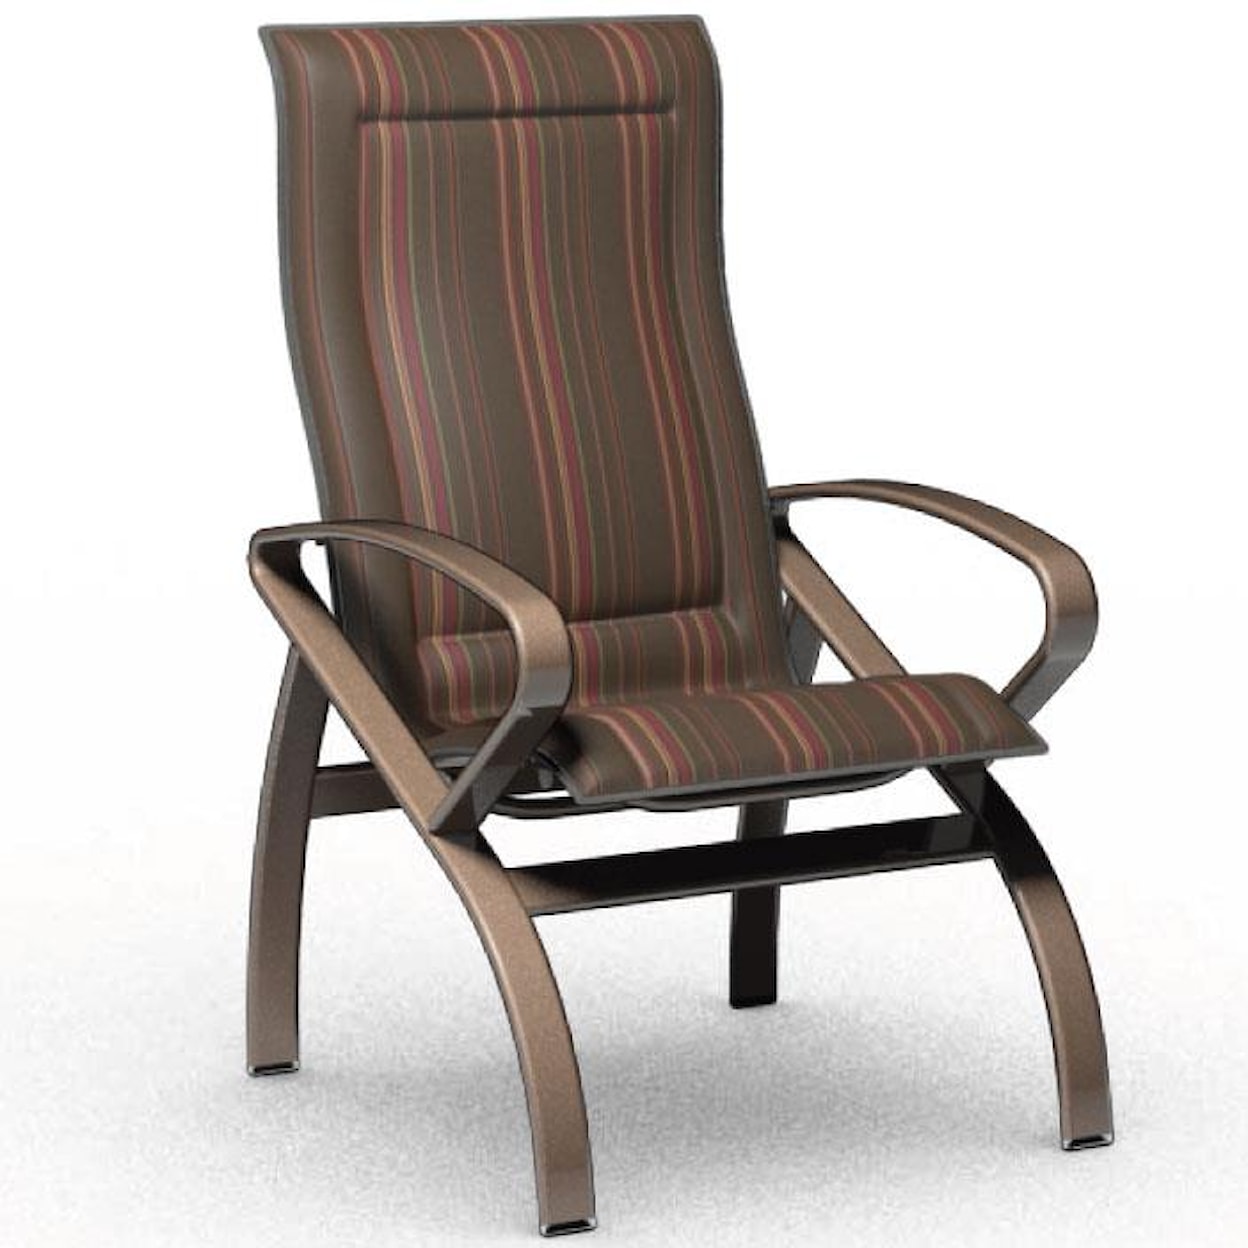 Homecrest Benton Collection High Back Dining Chair